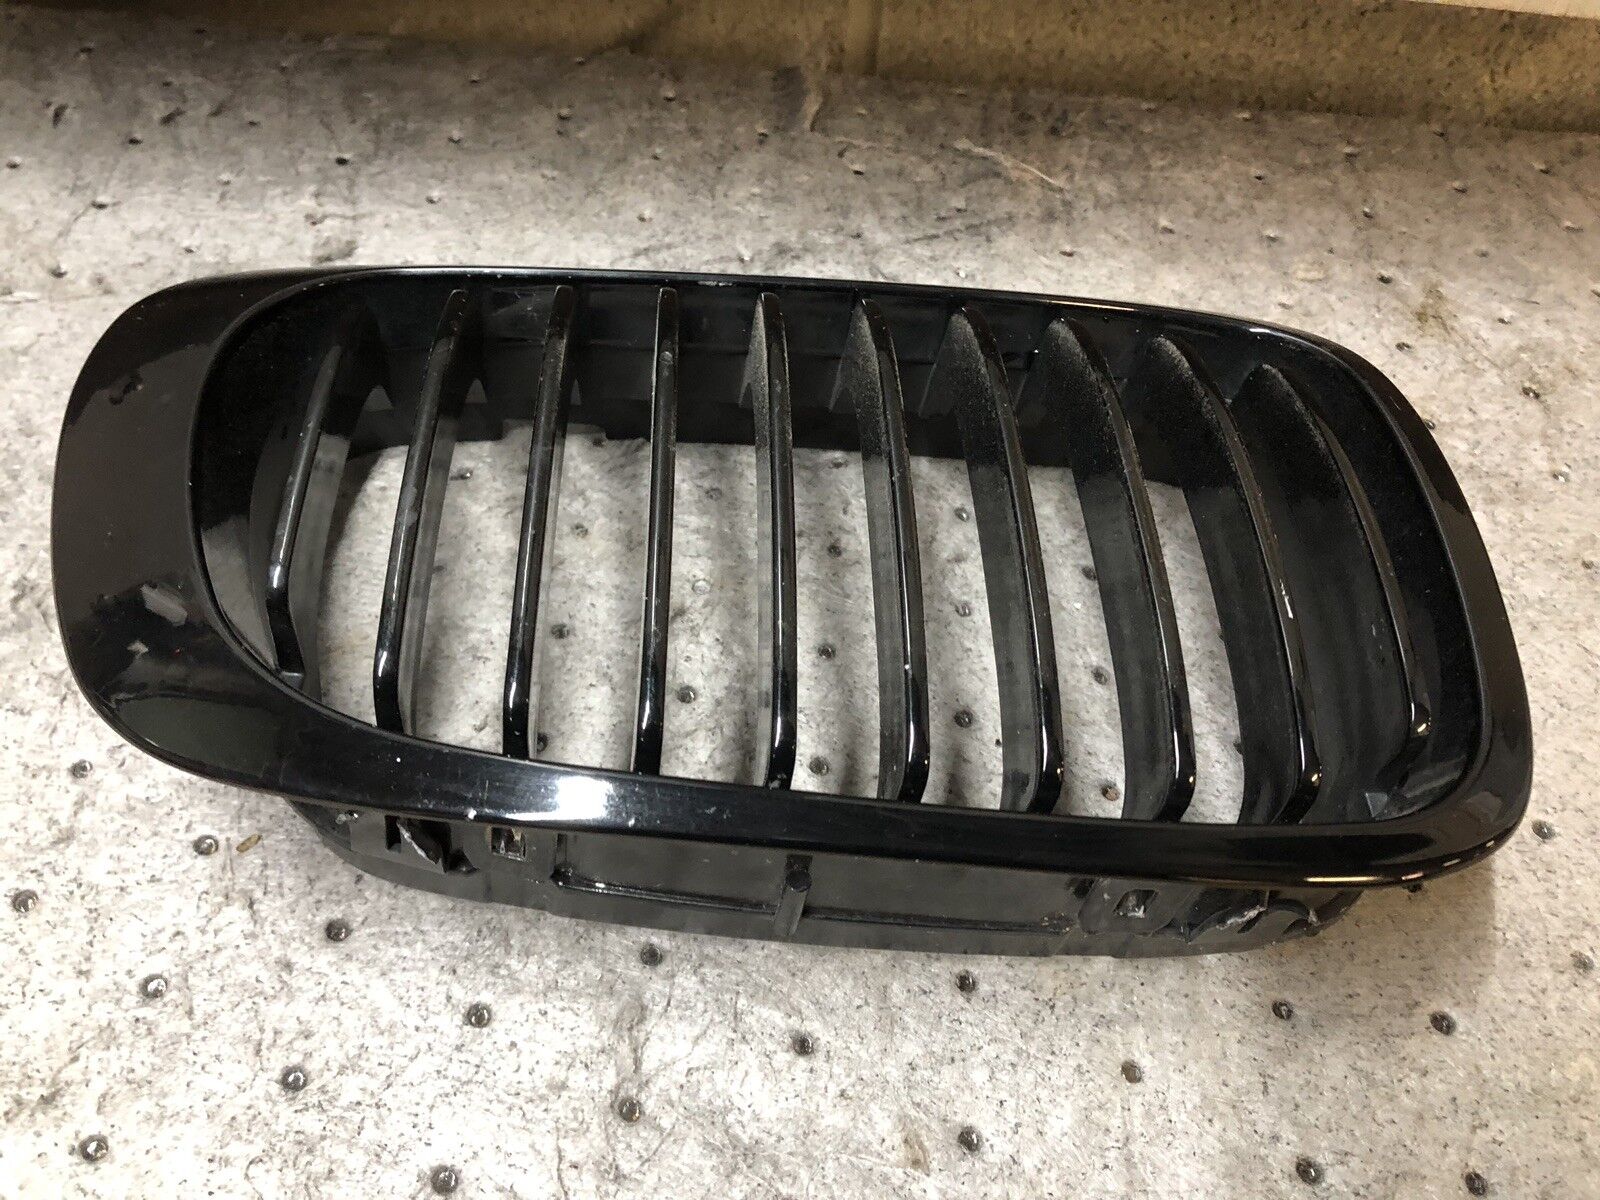 01-06 BMW E46 M3 Front Hood Kidney Grille Grill Gloss Black Right